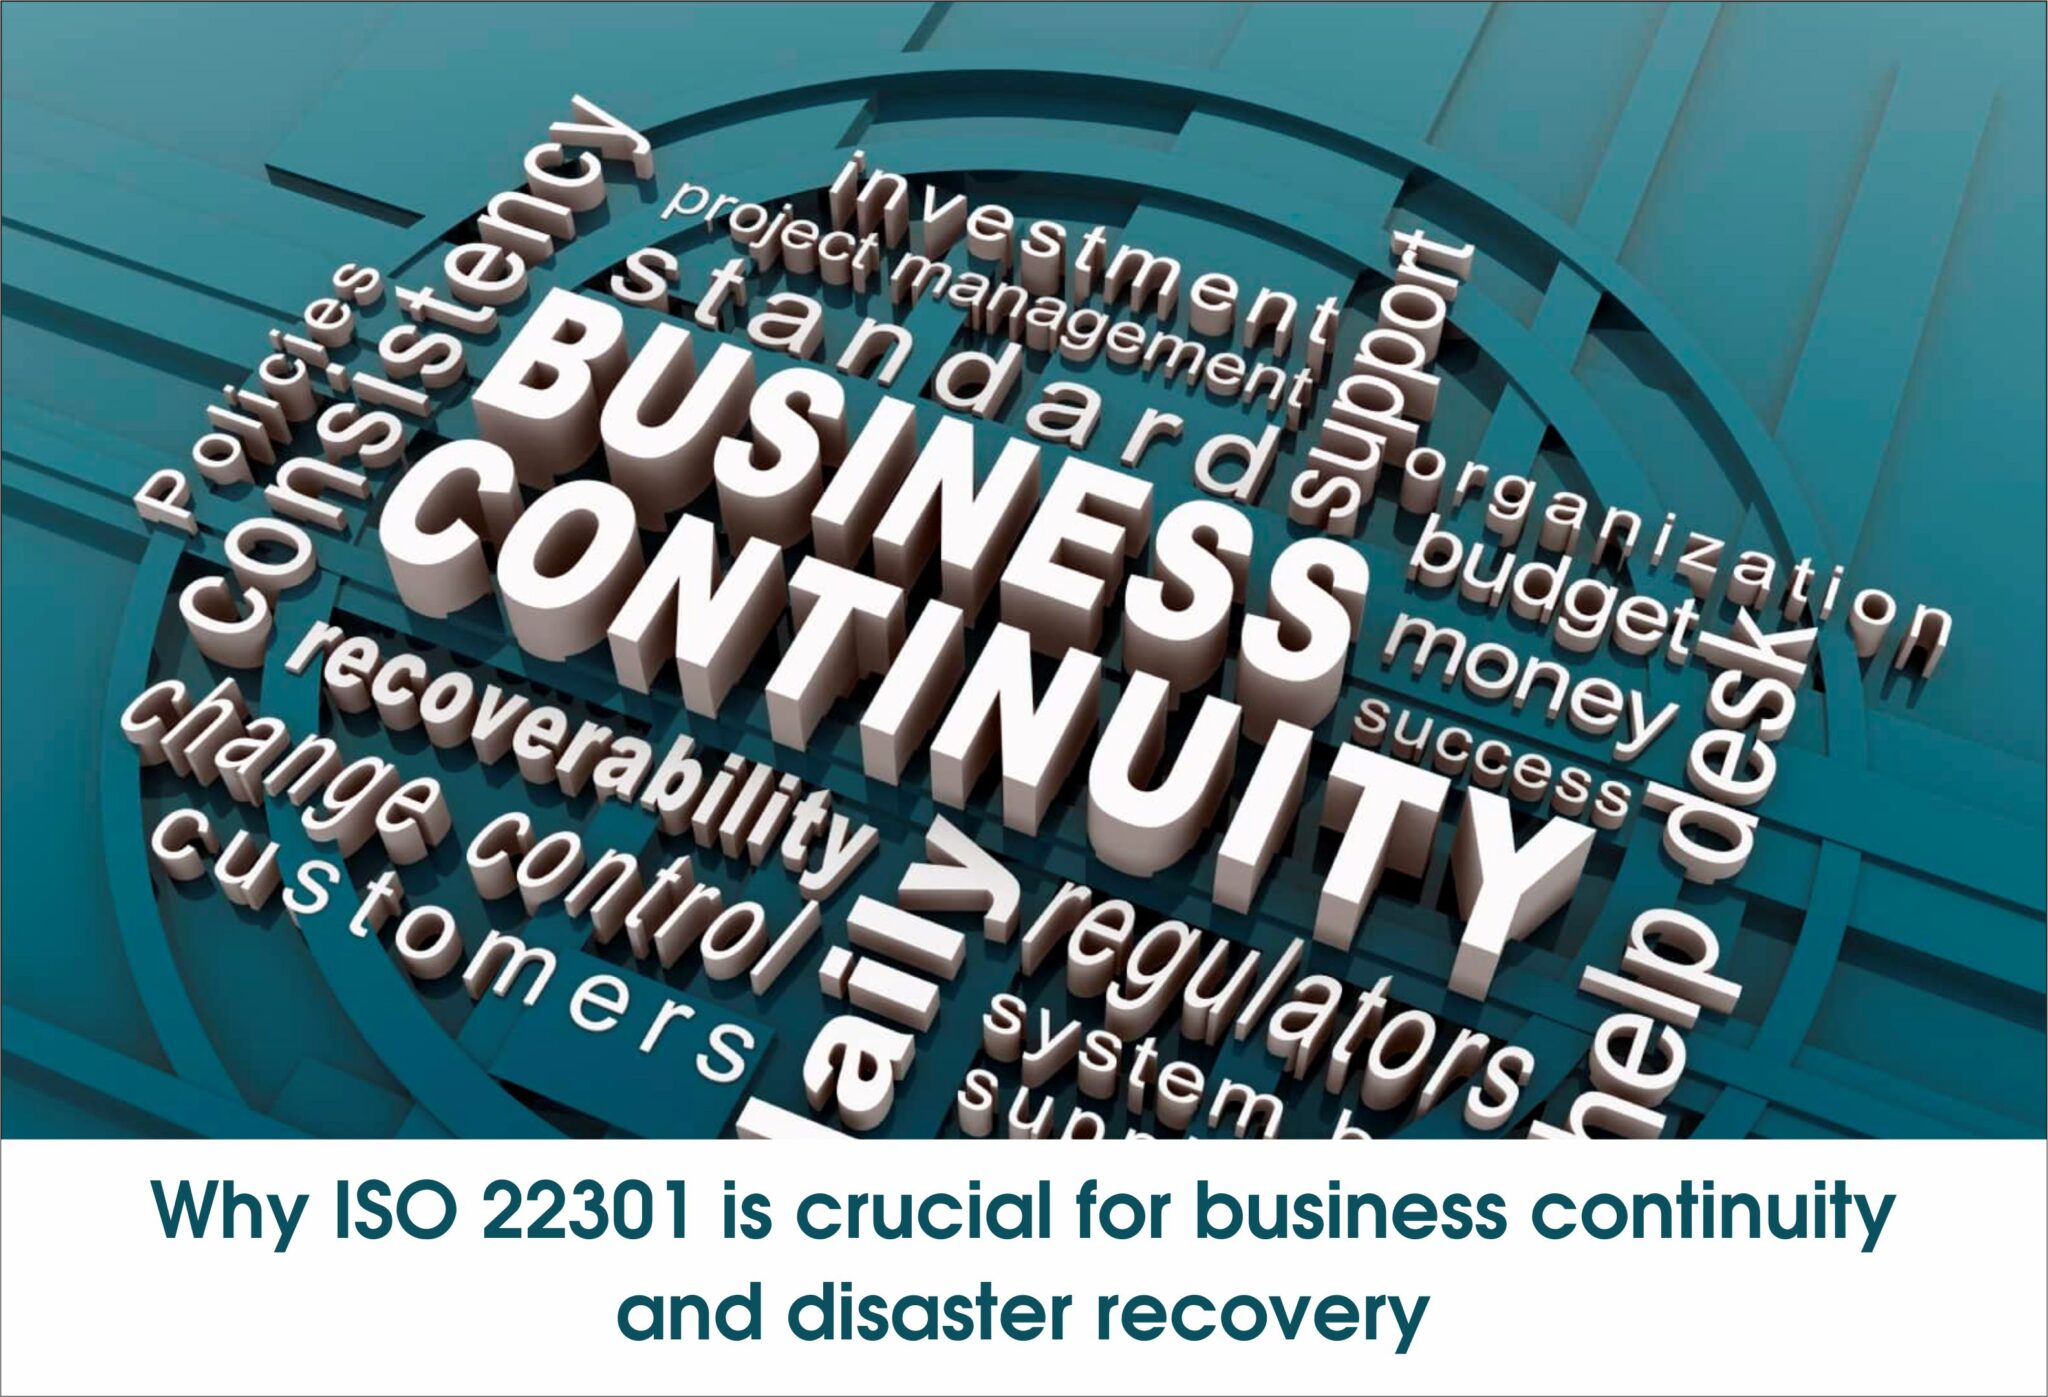 Why ISO 22301 is Crucial for Business Continuity and Disaster Recovery